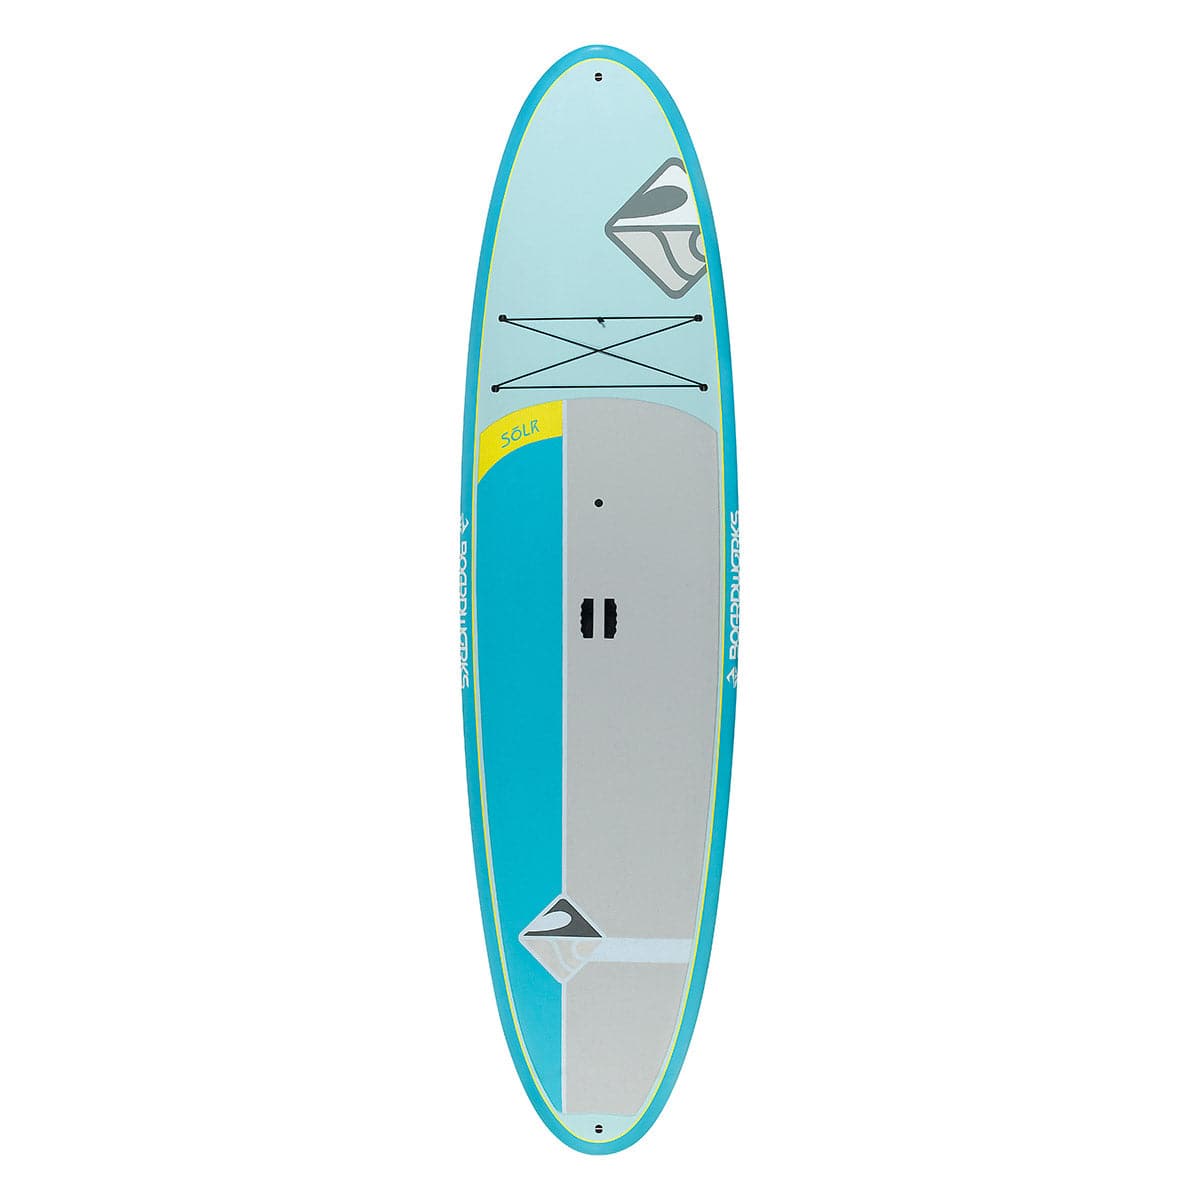 Featuring the Solr 10'6 SUP Package rigid sup manufactured by Boardworks shown here from a second angle.